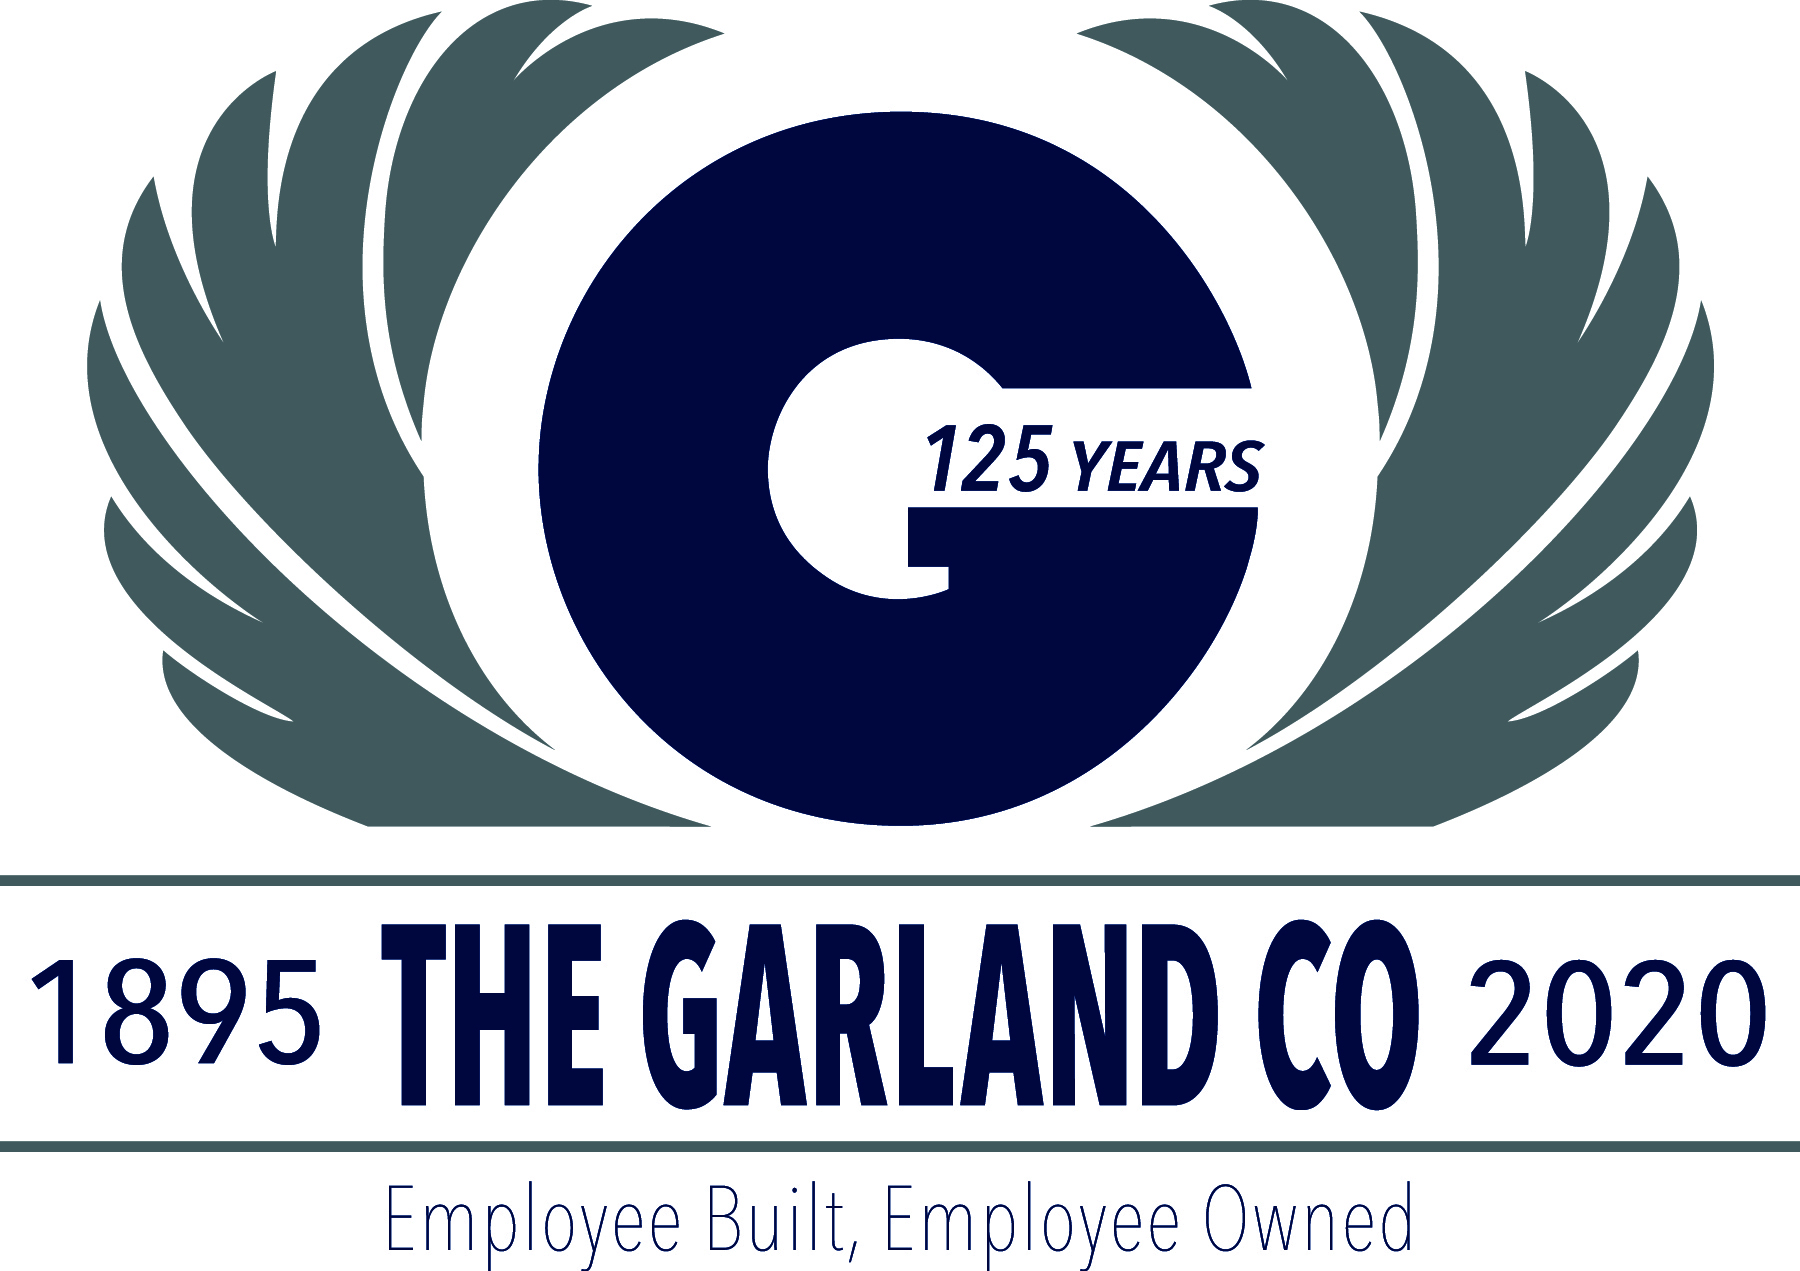 The Garland Co. Celebrates 125th Anniversary by Giving Back to the Community